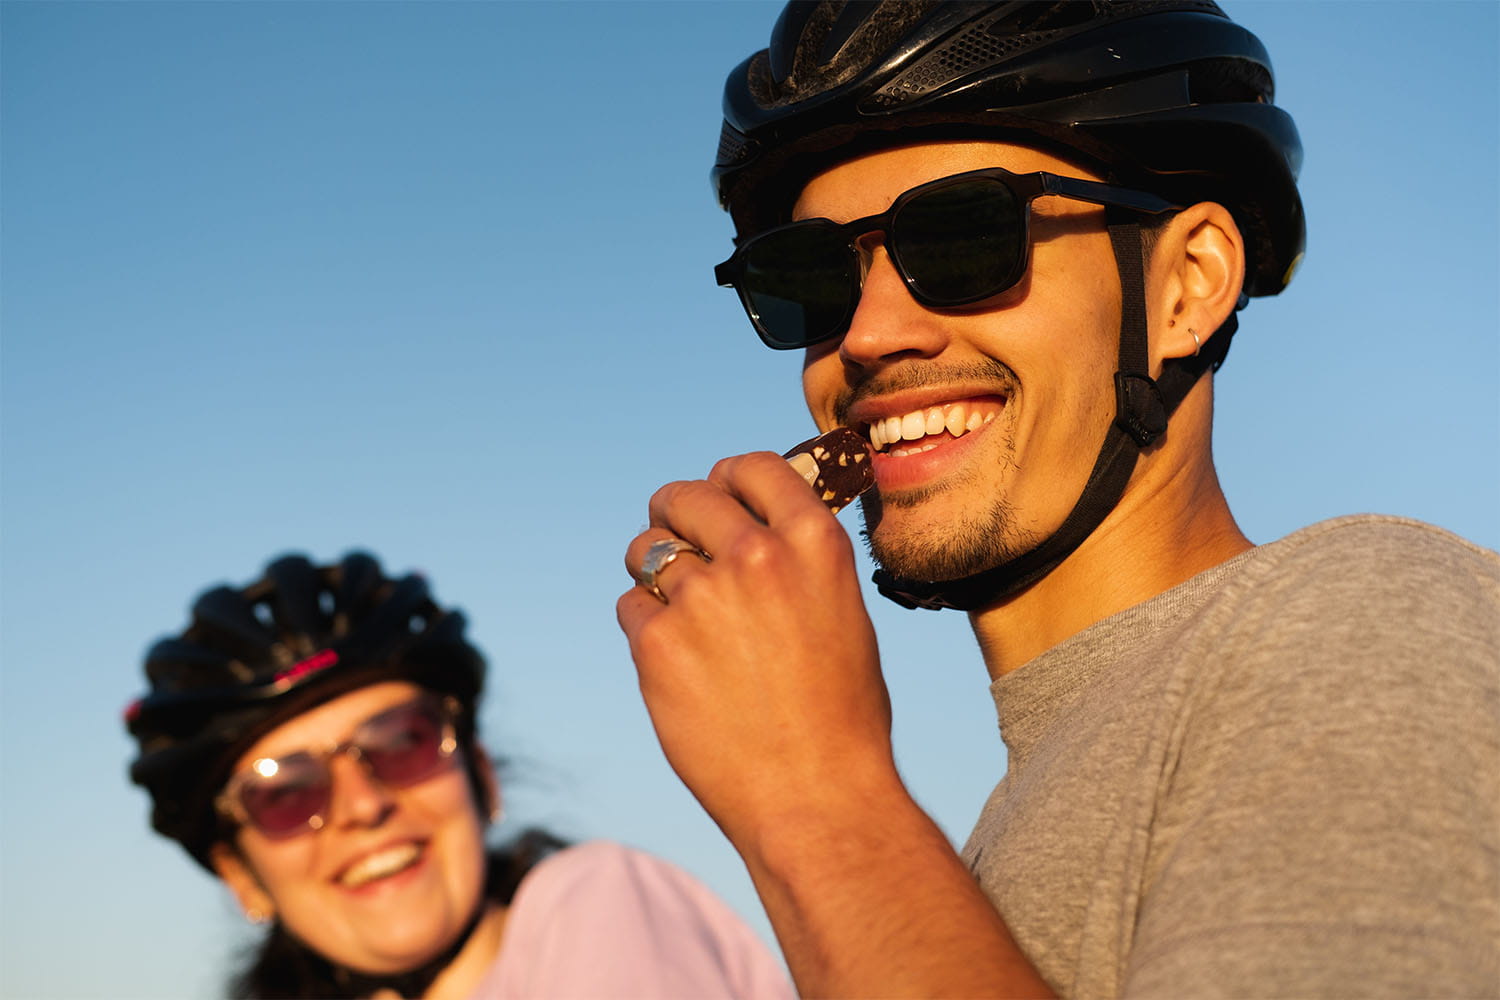 Man eating high energy snack for cycling